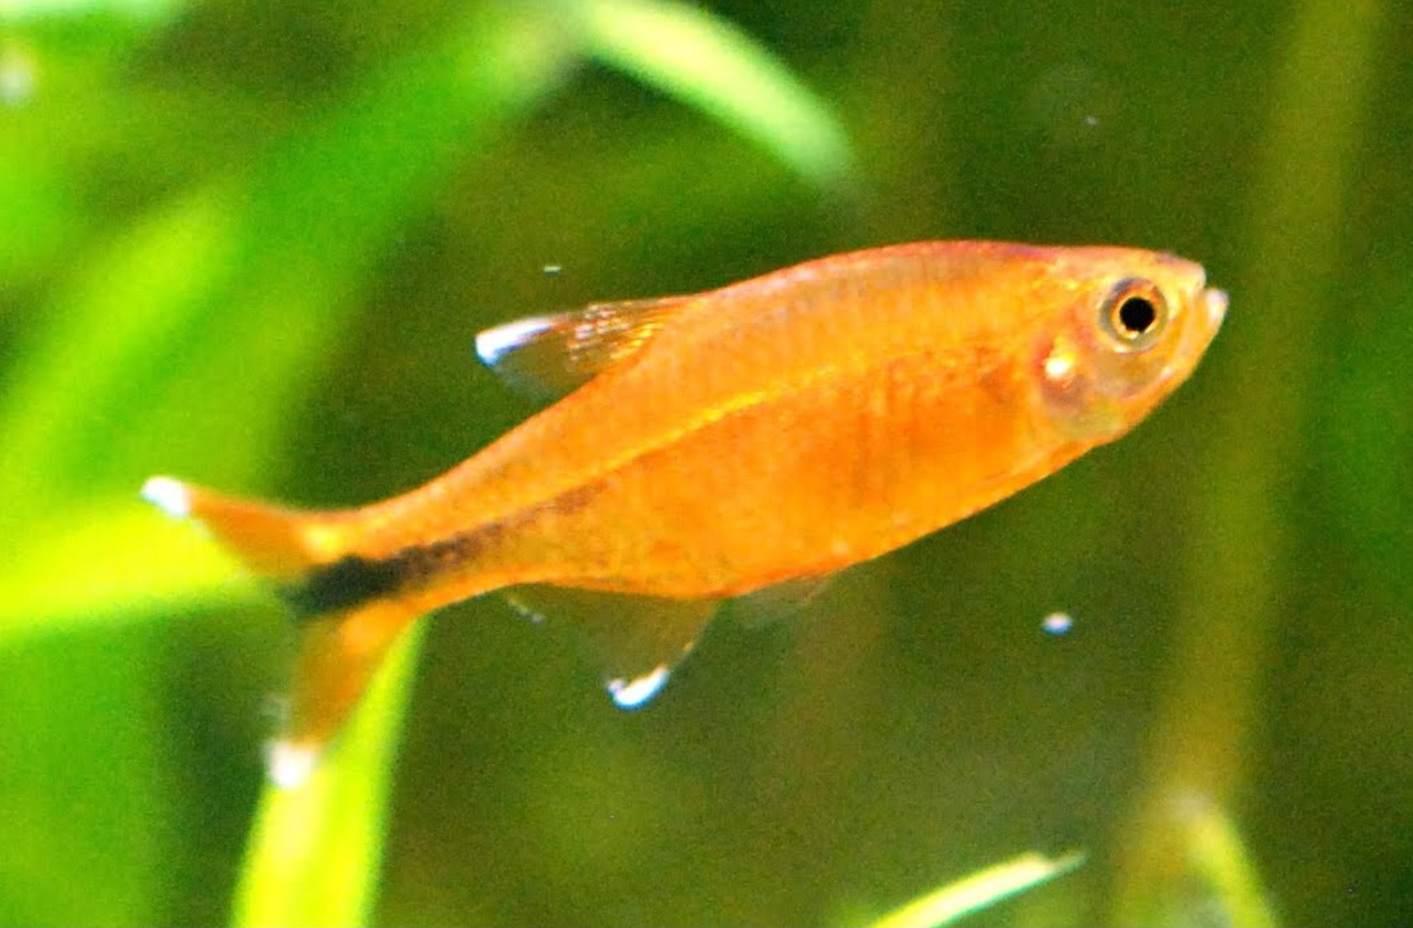 silvertip tetra (they swim in tied schools, females are yellowish while males are orange) - meme